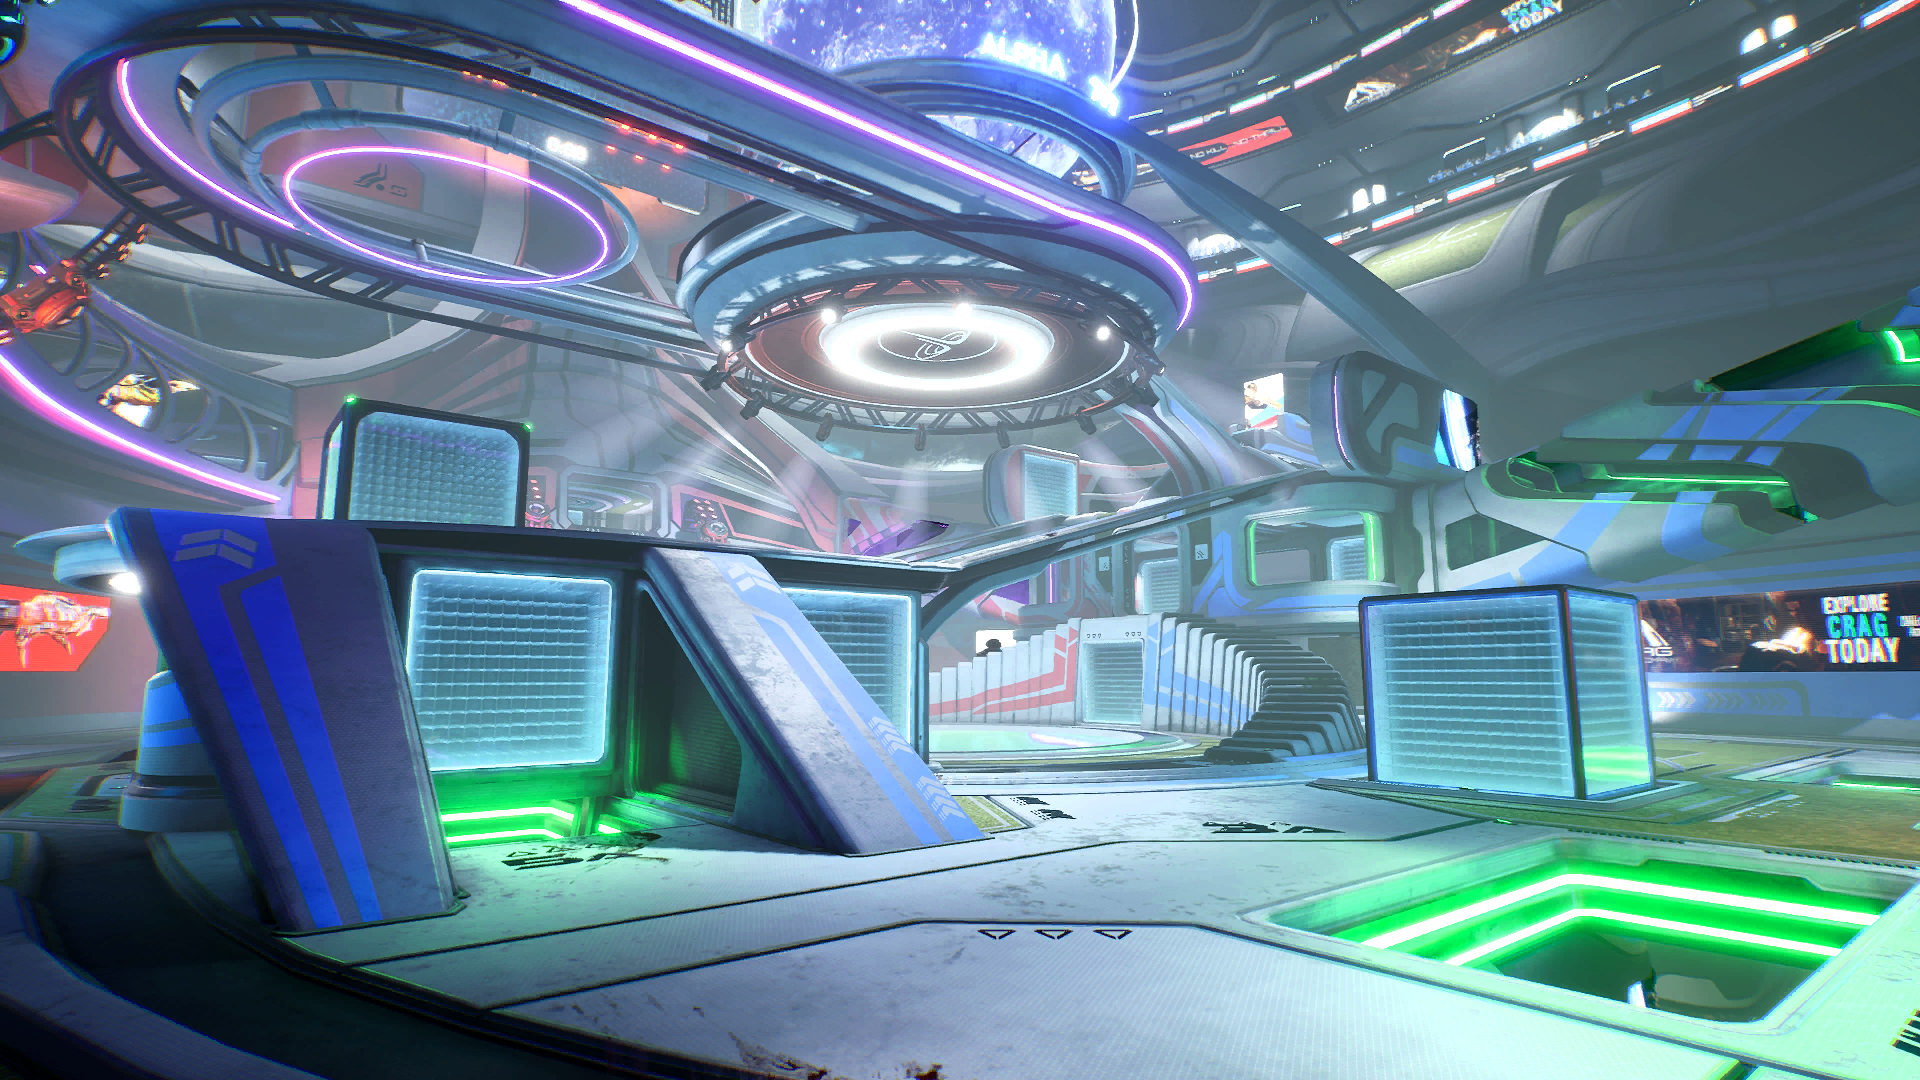 Splitgate Enters the Arena with AccelByte Multiplayer Backend